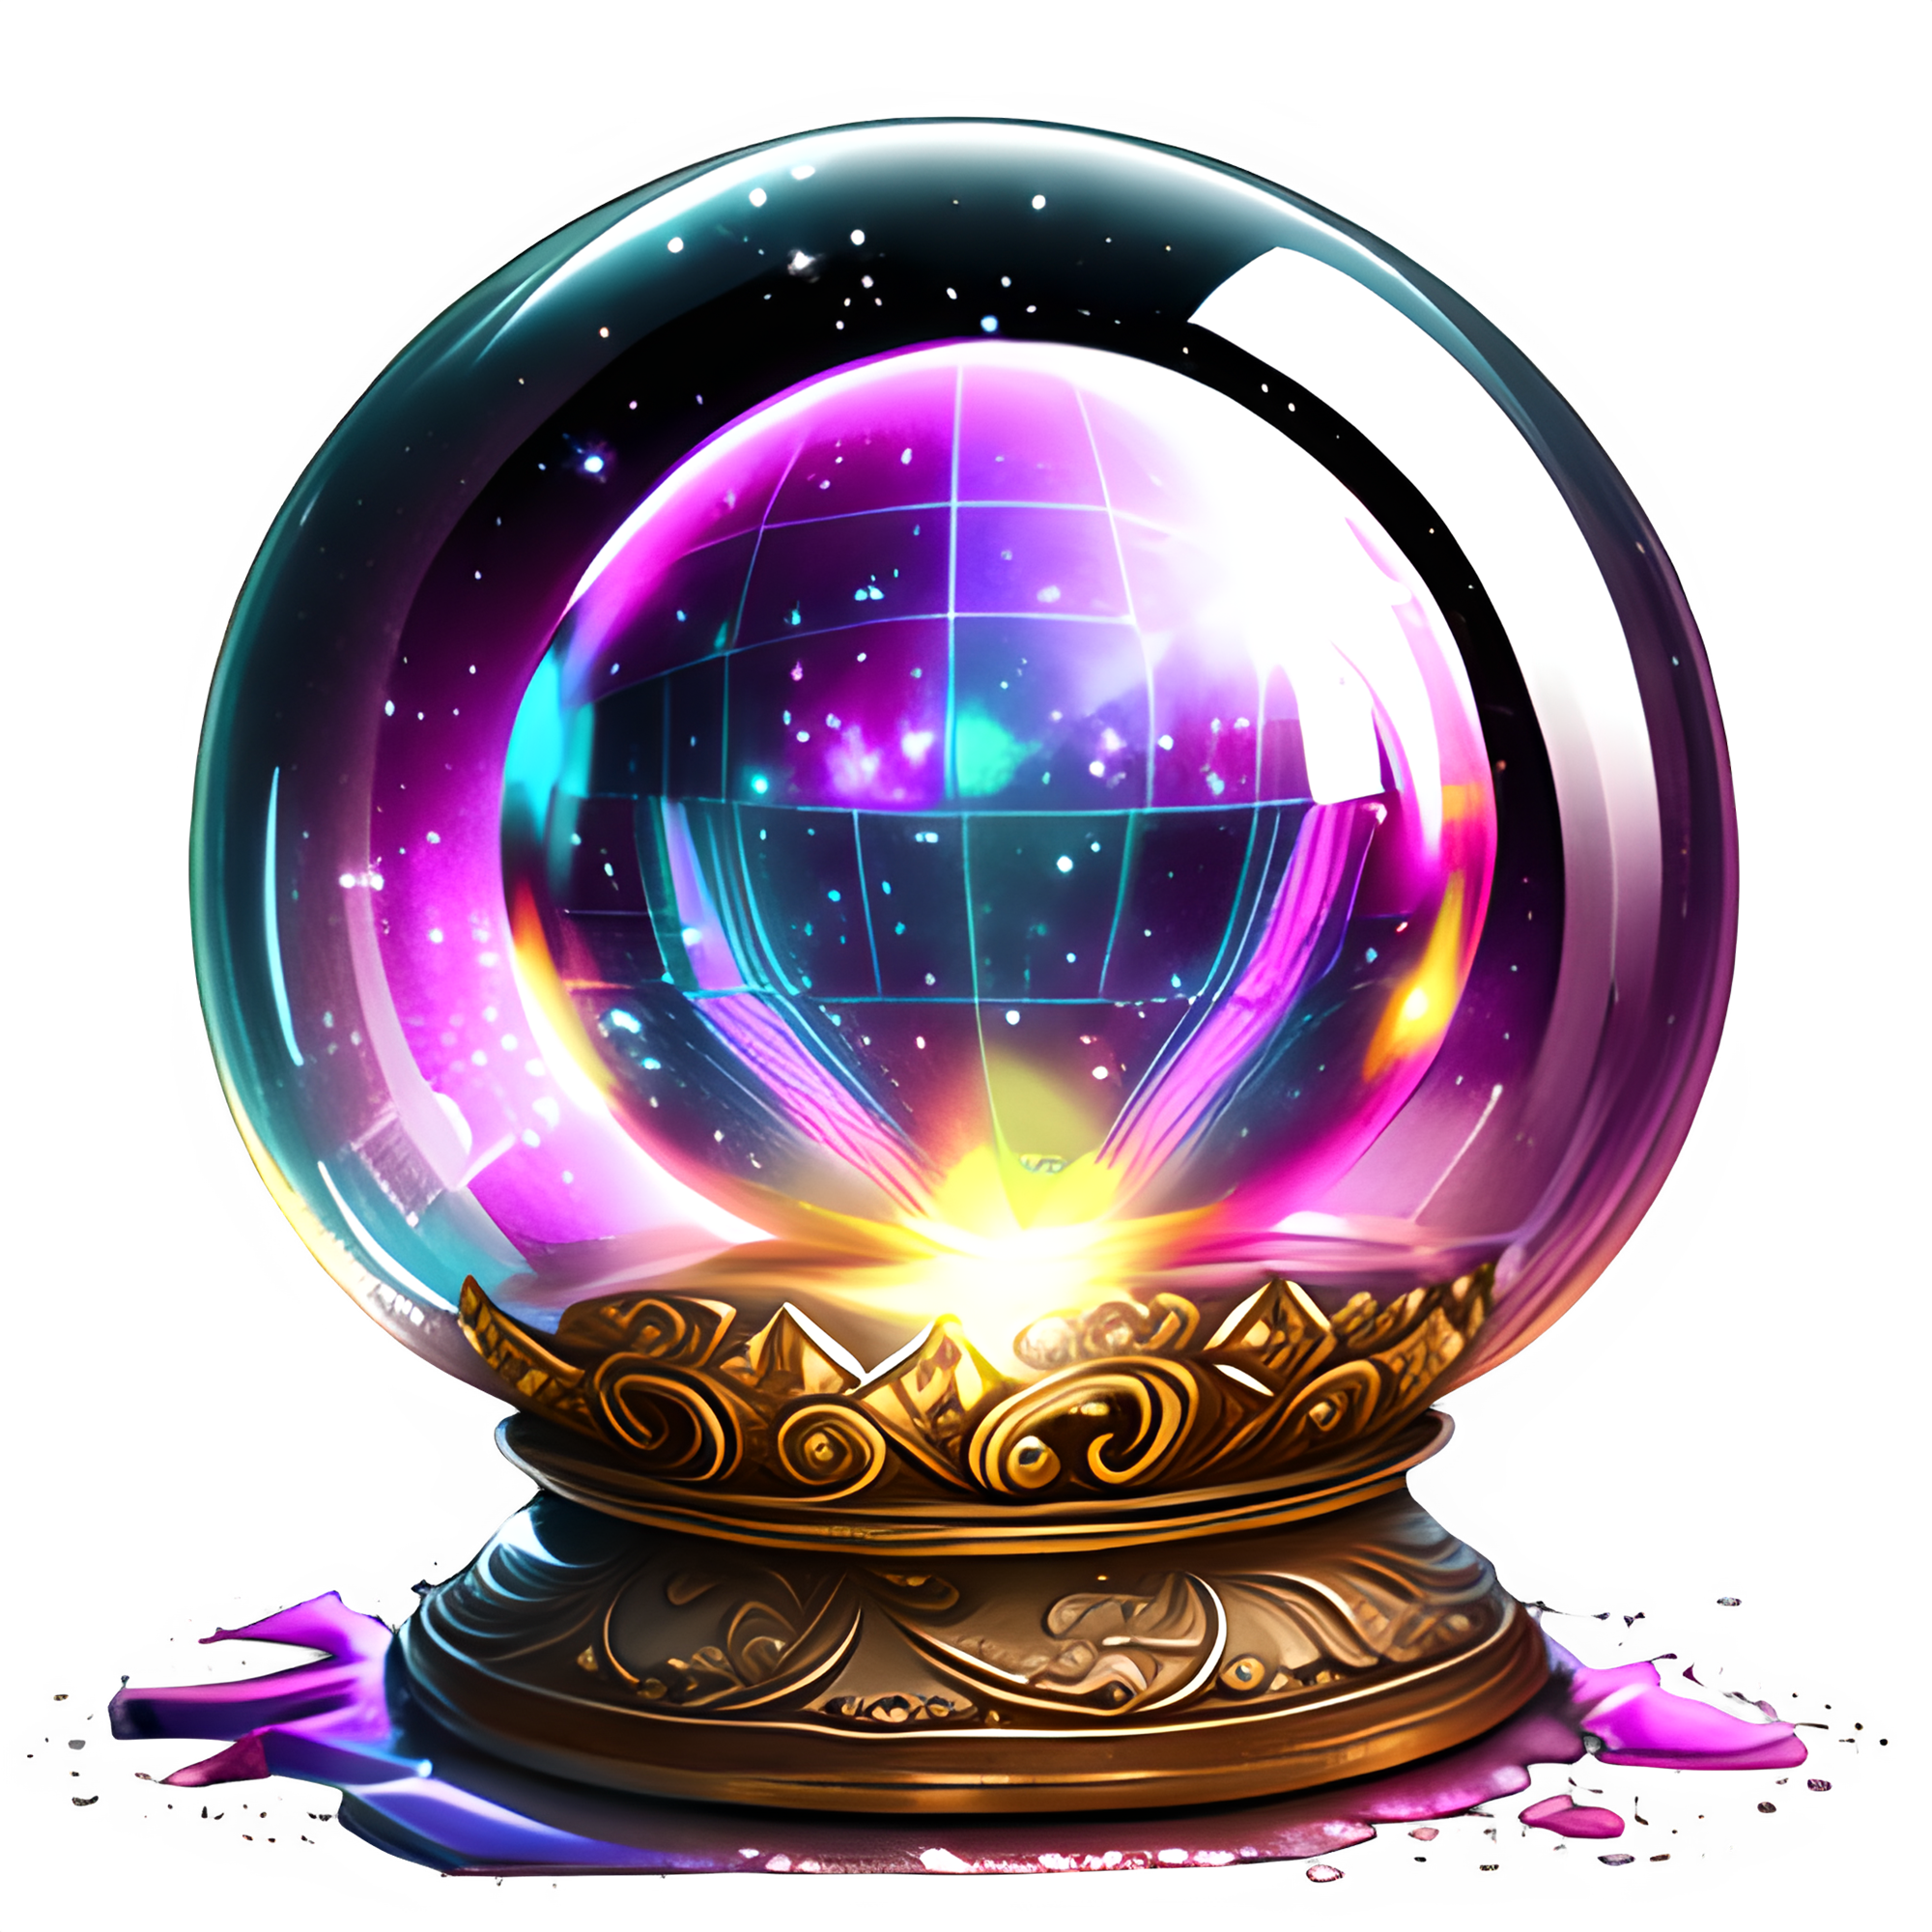 Crystal Ball Clip Art @ Copyright Designs by Forte